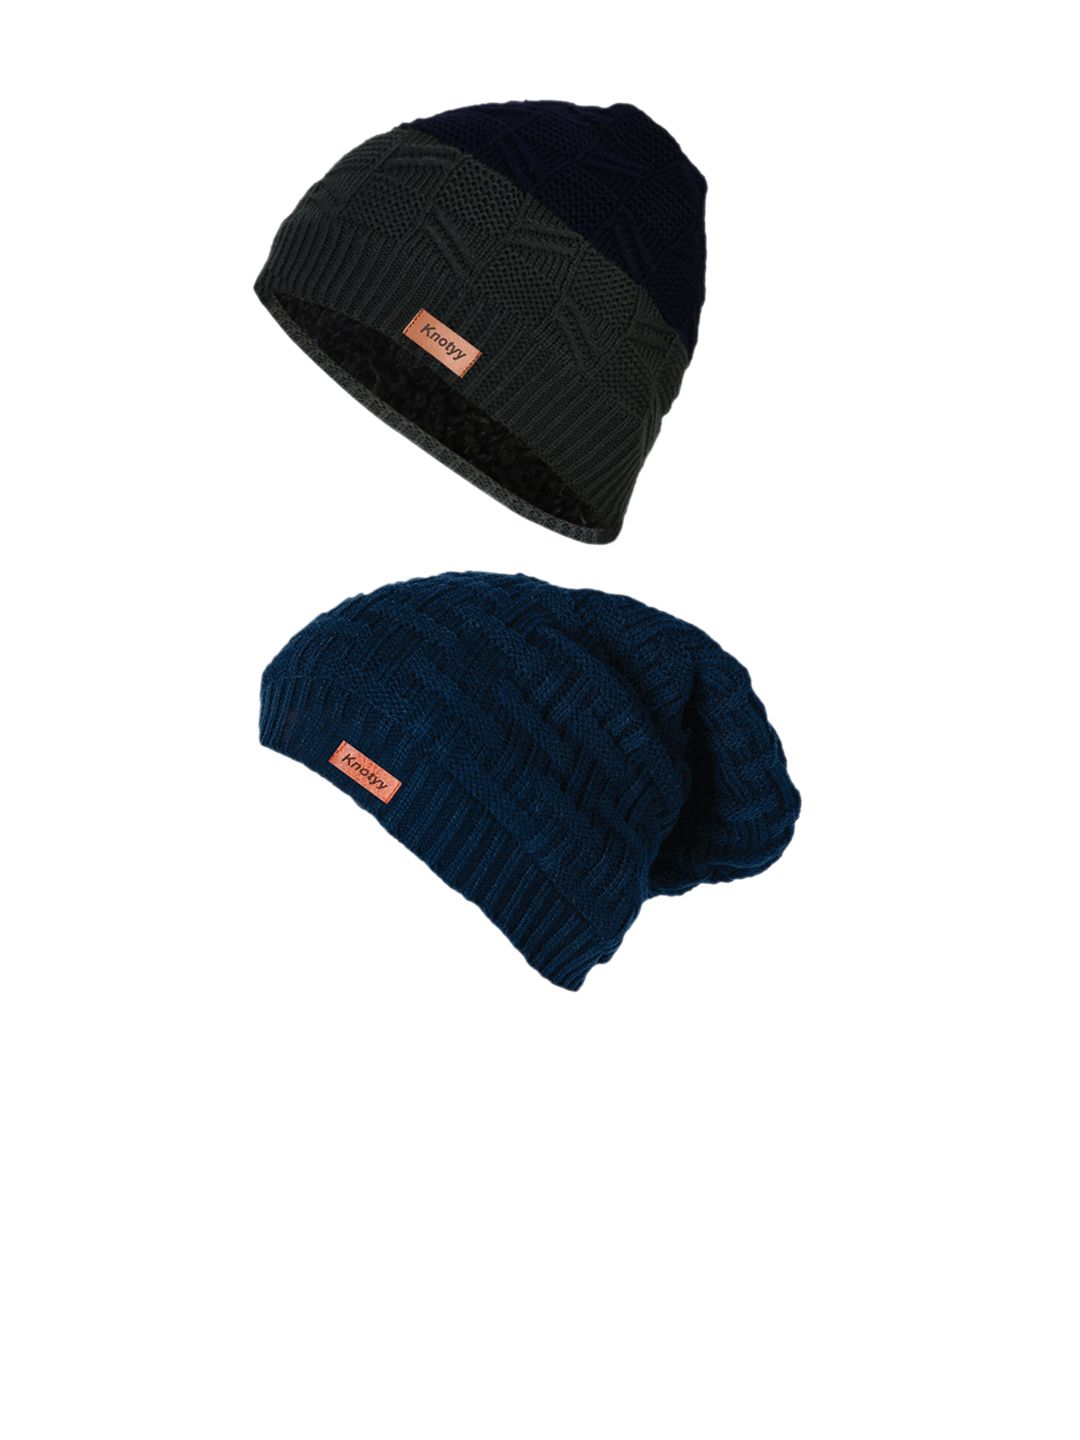 Knotyy Unisex Pack Of 2 Navy Blue & Grey Self Design Beanie Price in India